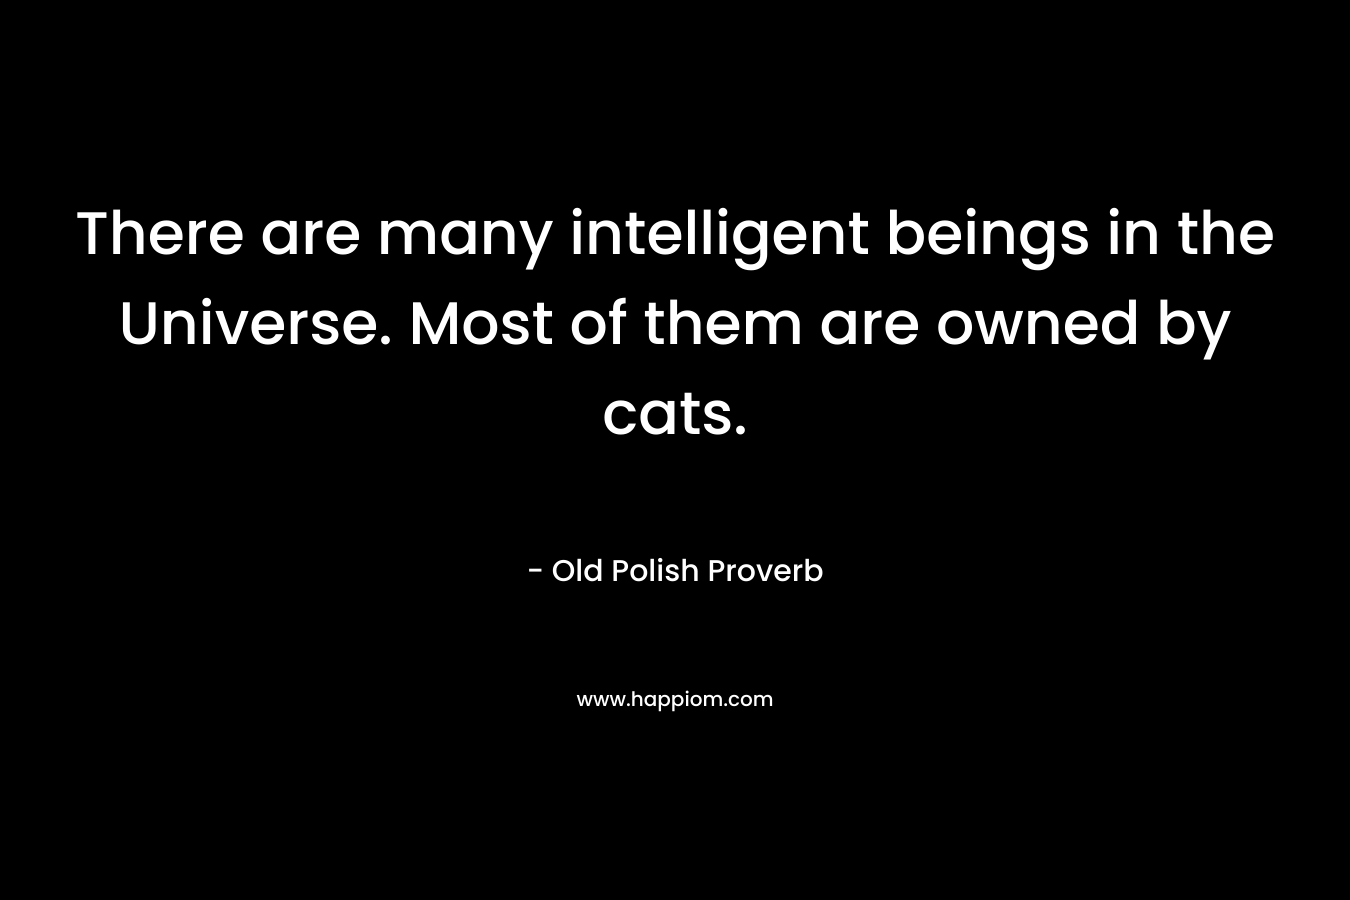 There are many intelligent beings in the Universe. Most of them are owned by cats. – Old Polish Proverb